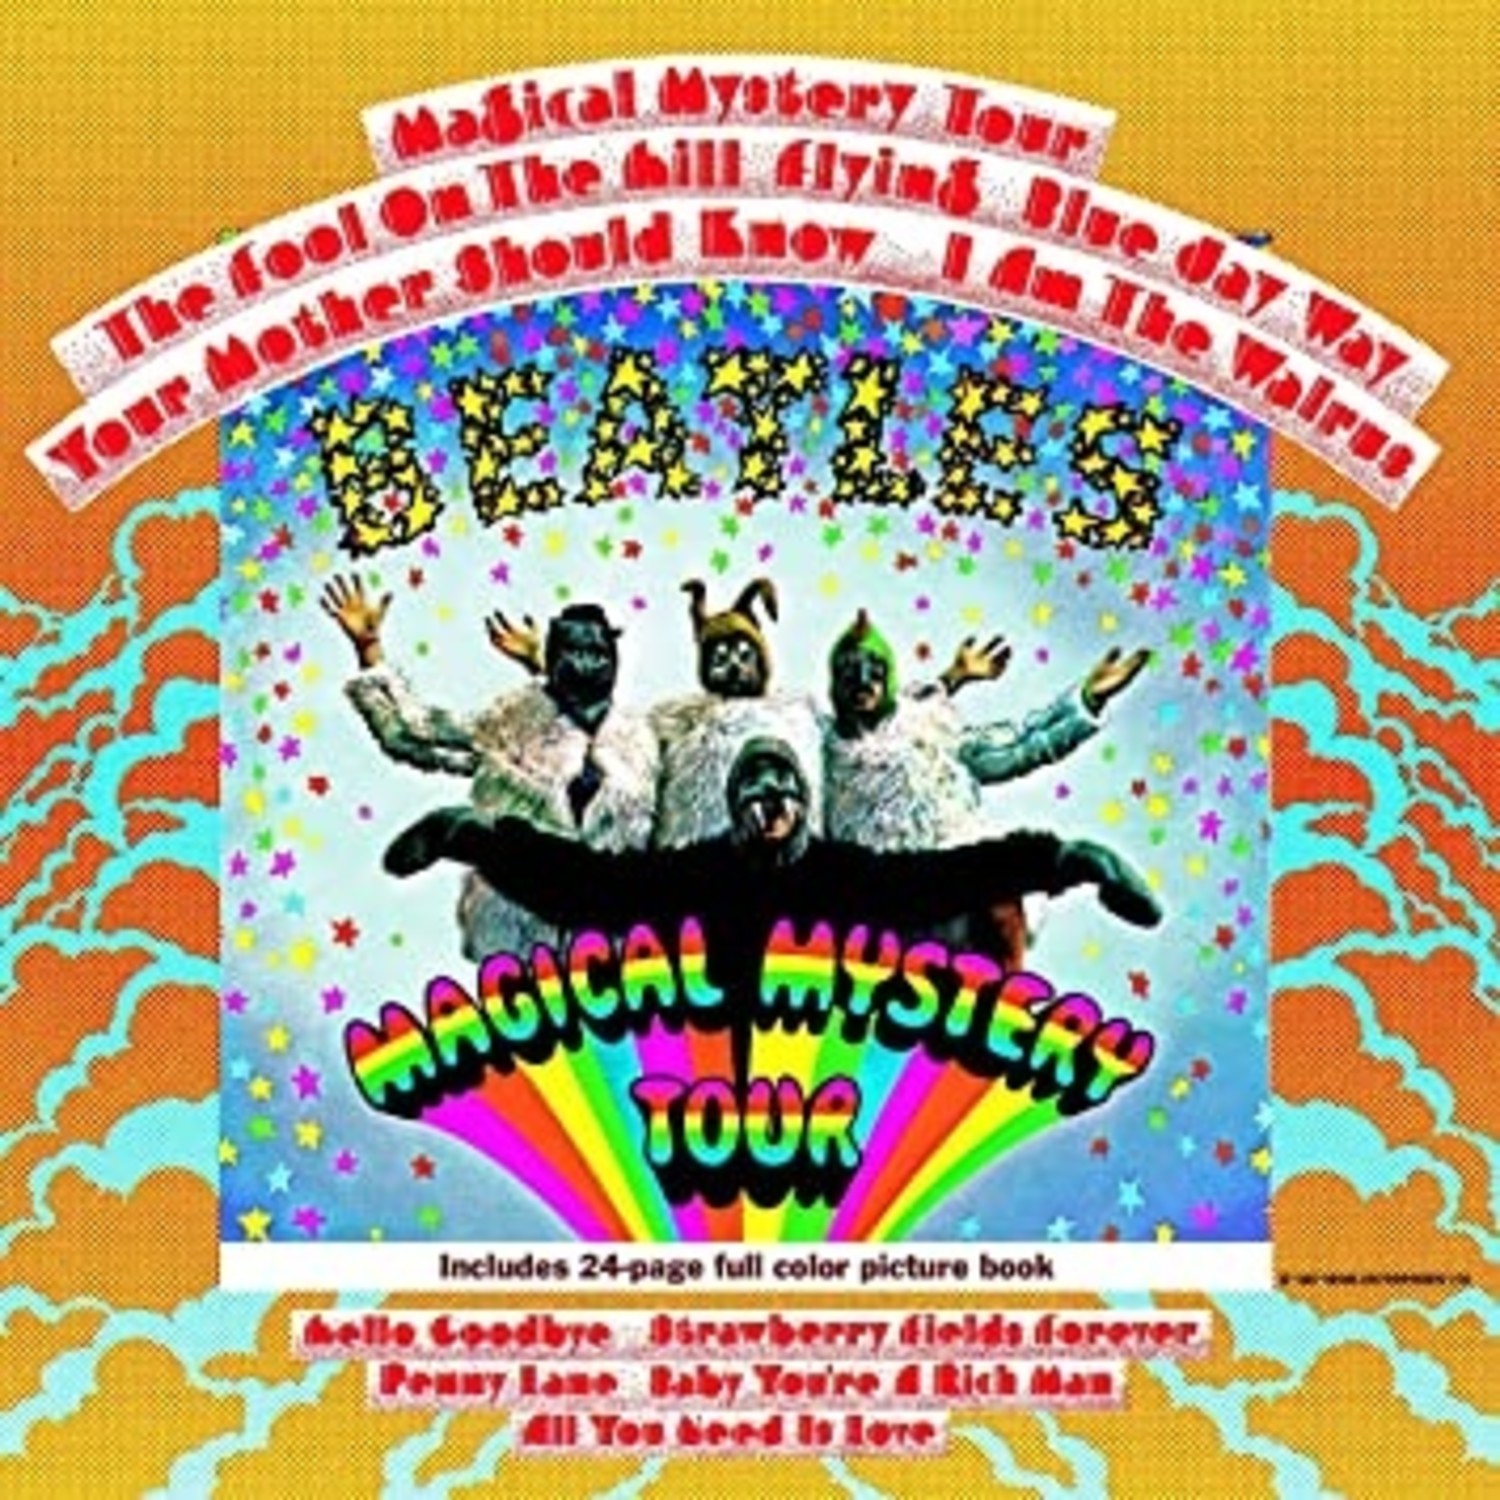 Magical Mystery Tour Remastered LP - Wax Trax Records